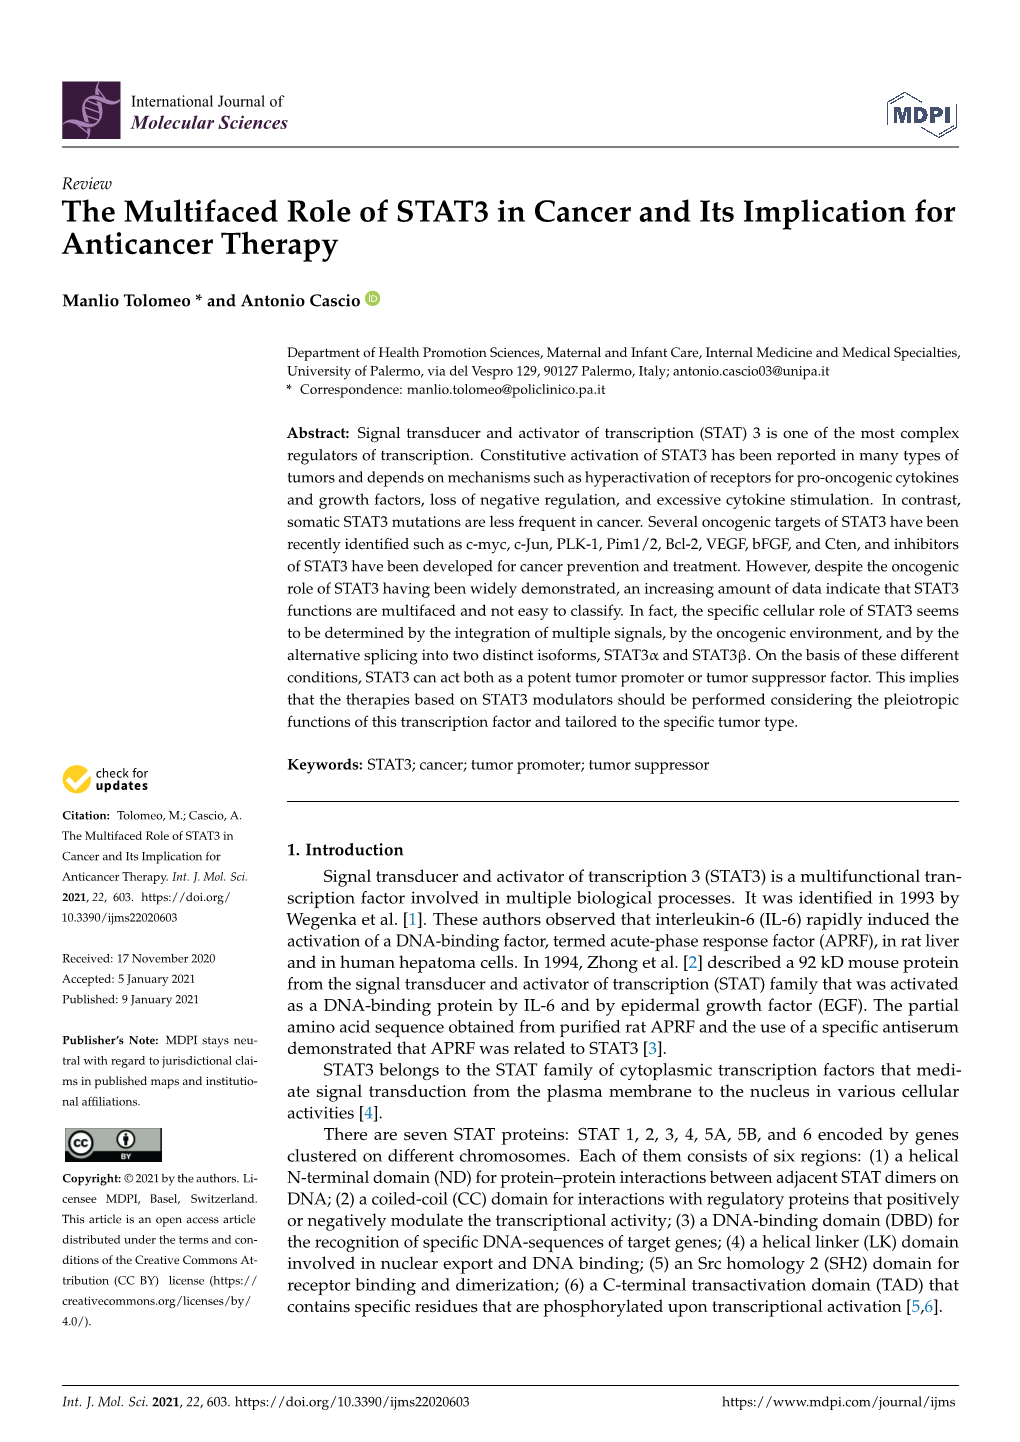 The Multifaced Role of STAT3 in Cancer and Its Implication for Anticancer Therapy